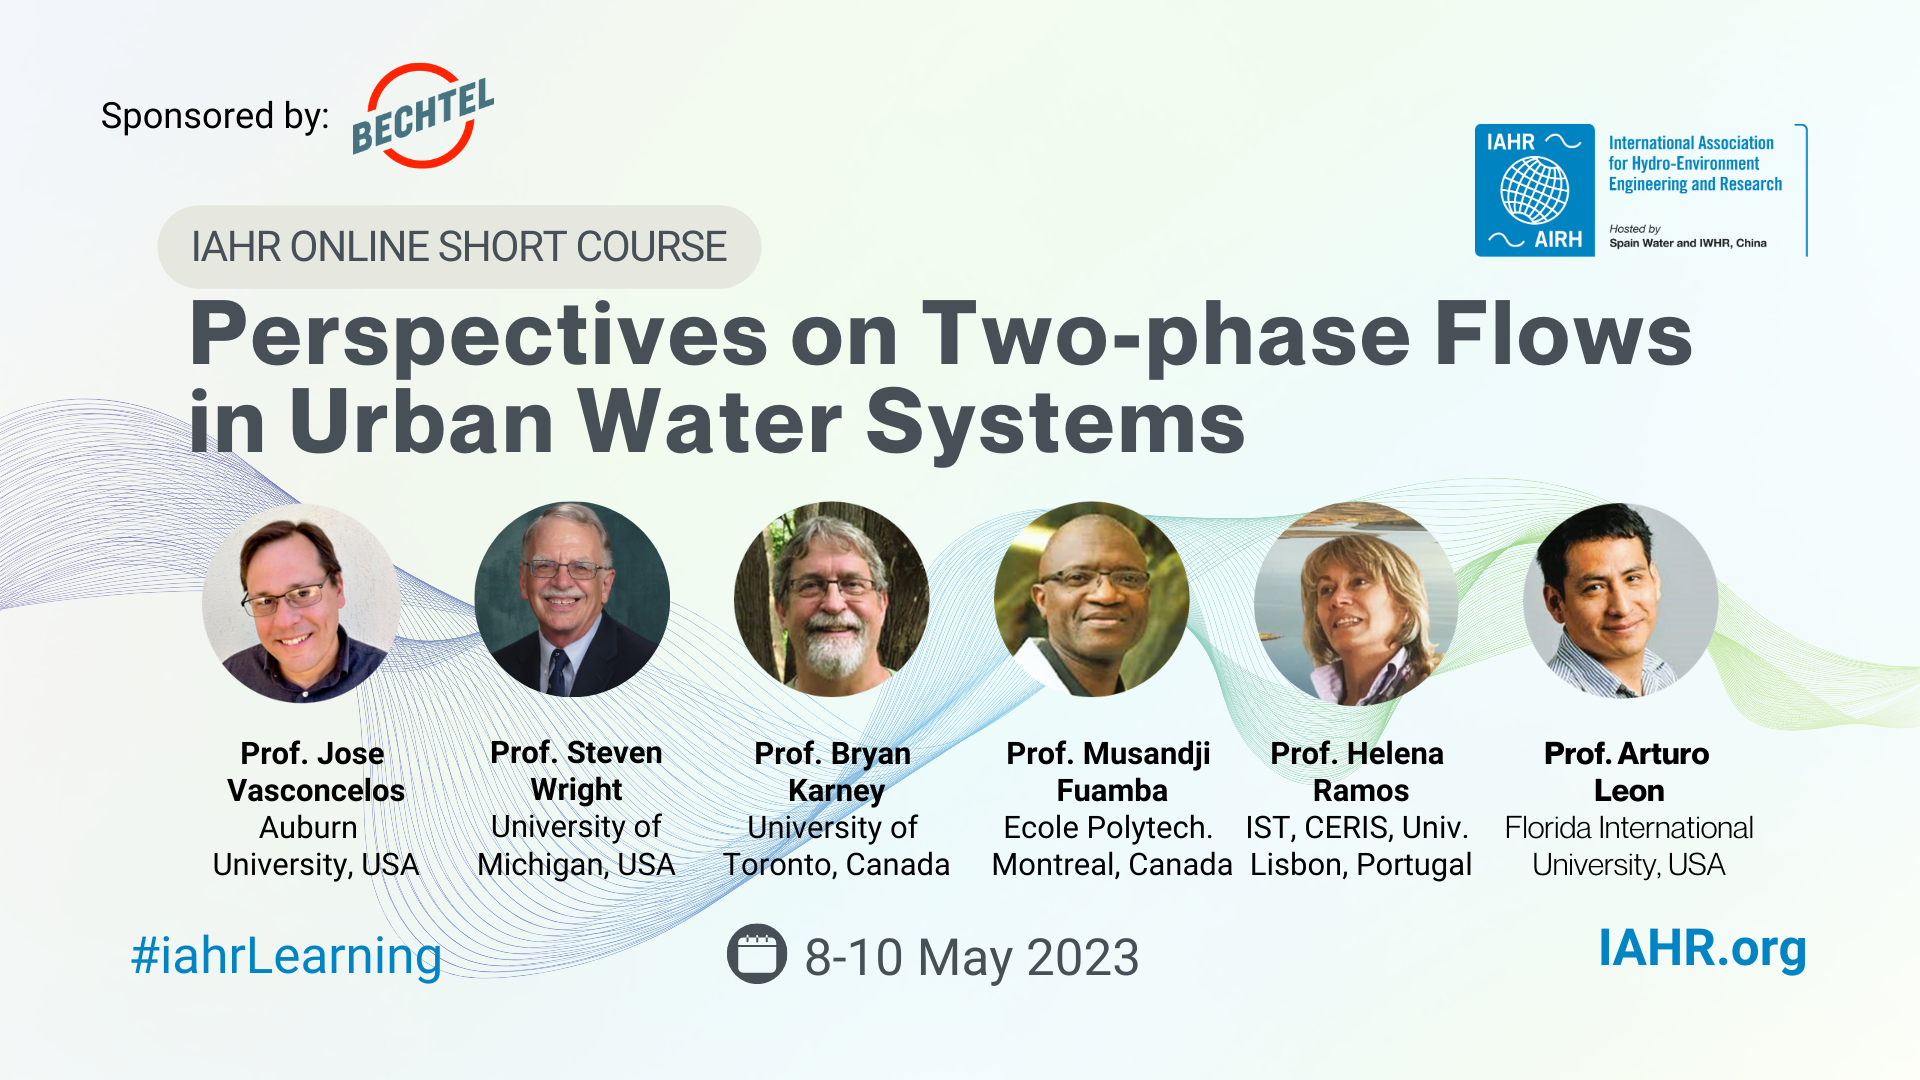 IAHR Short Course Perspectives on Two-phase Flows in Urban Water Systems